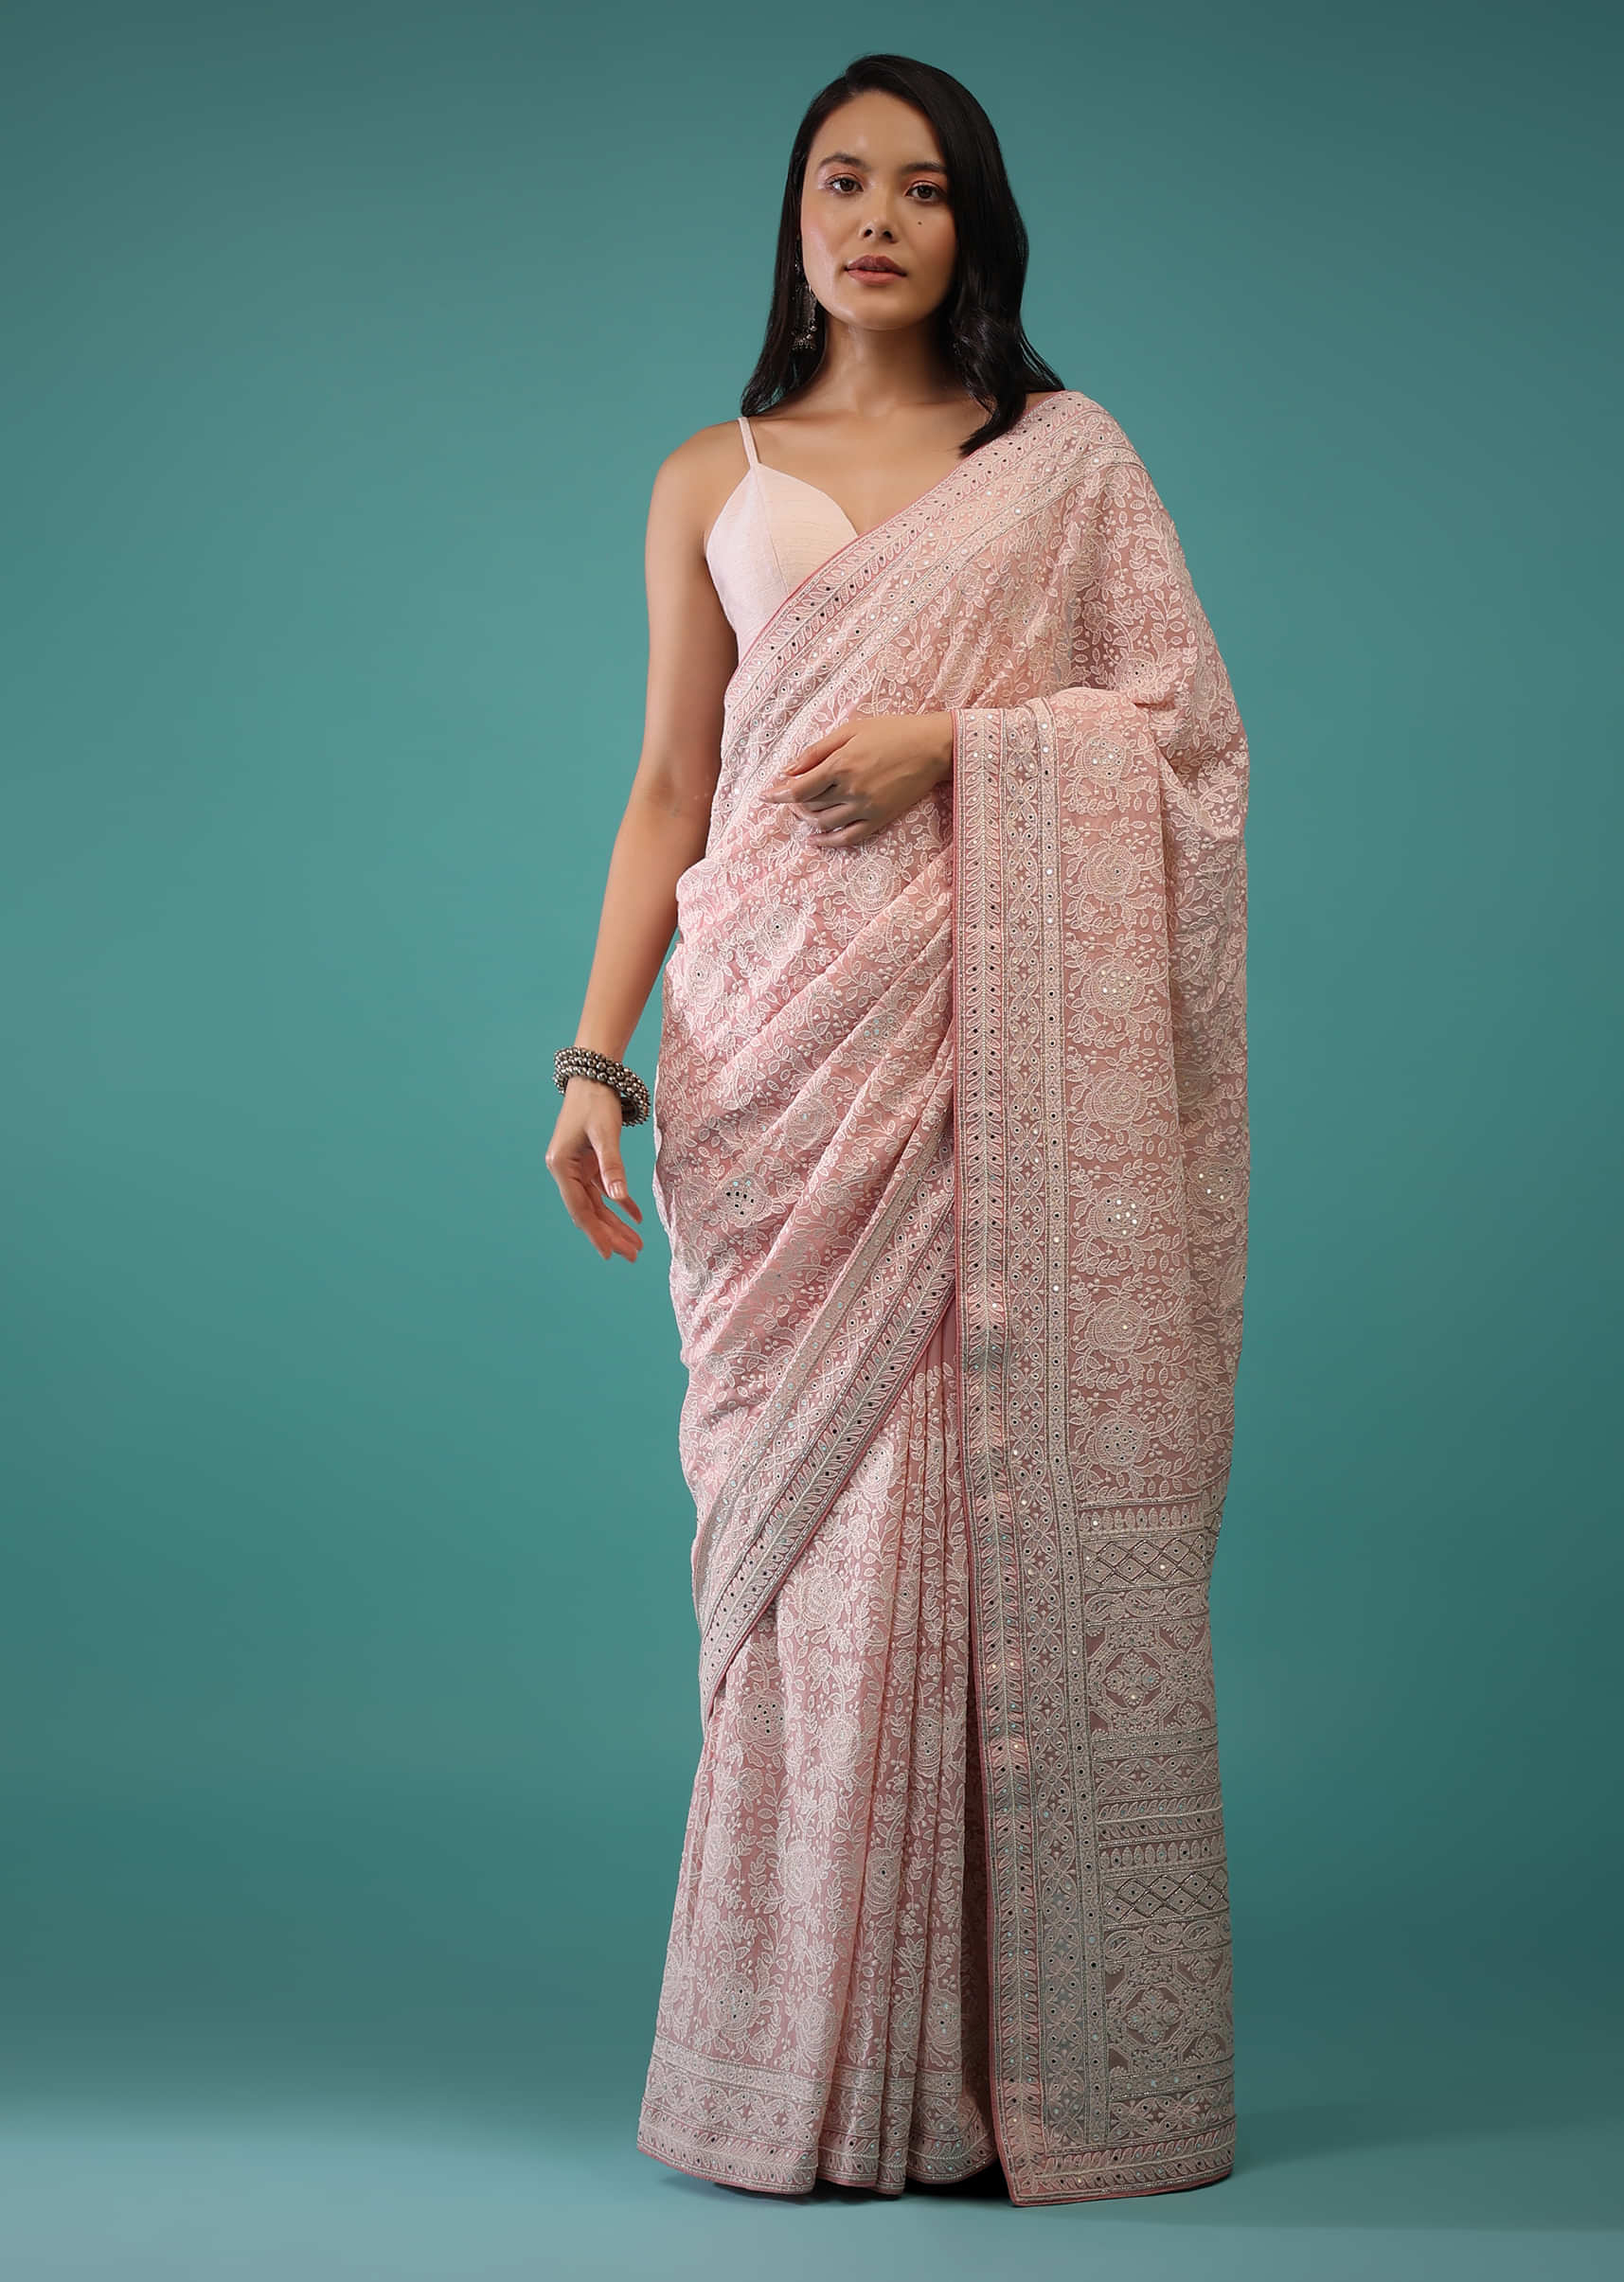 Mellow Rose Georgette Saree In Lucknowi Threadwork, Mirror Embroidery Buttis On The Border